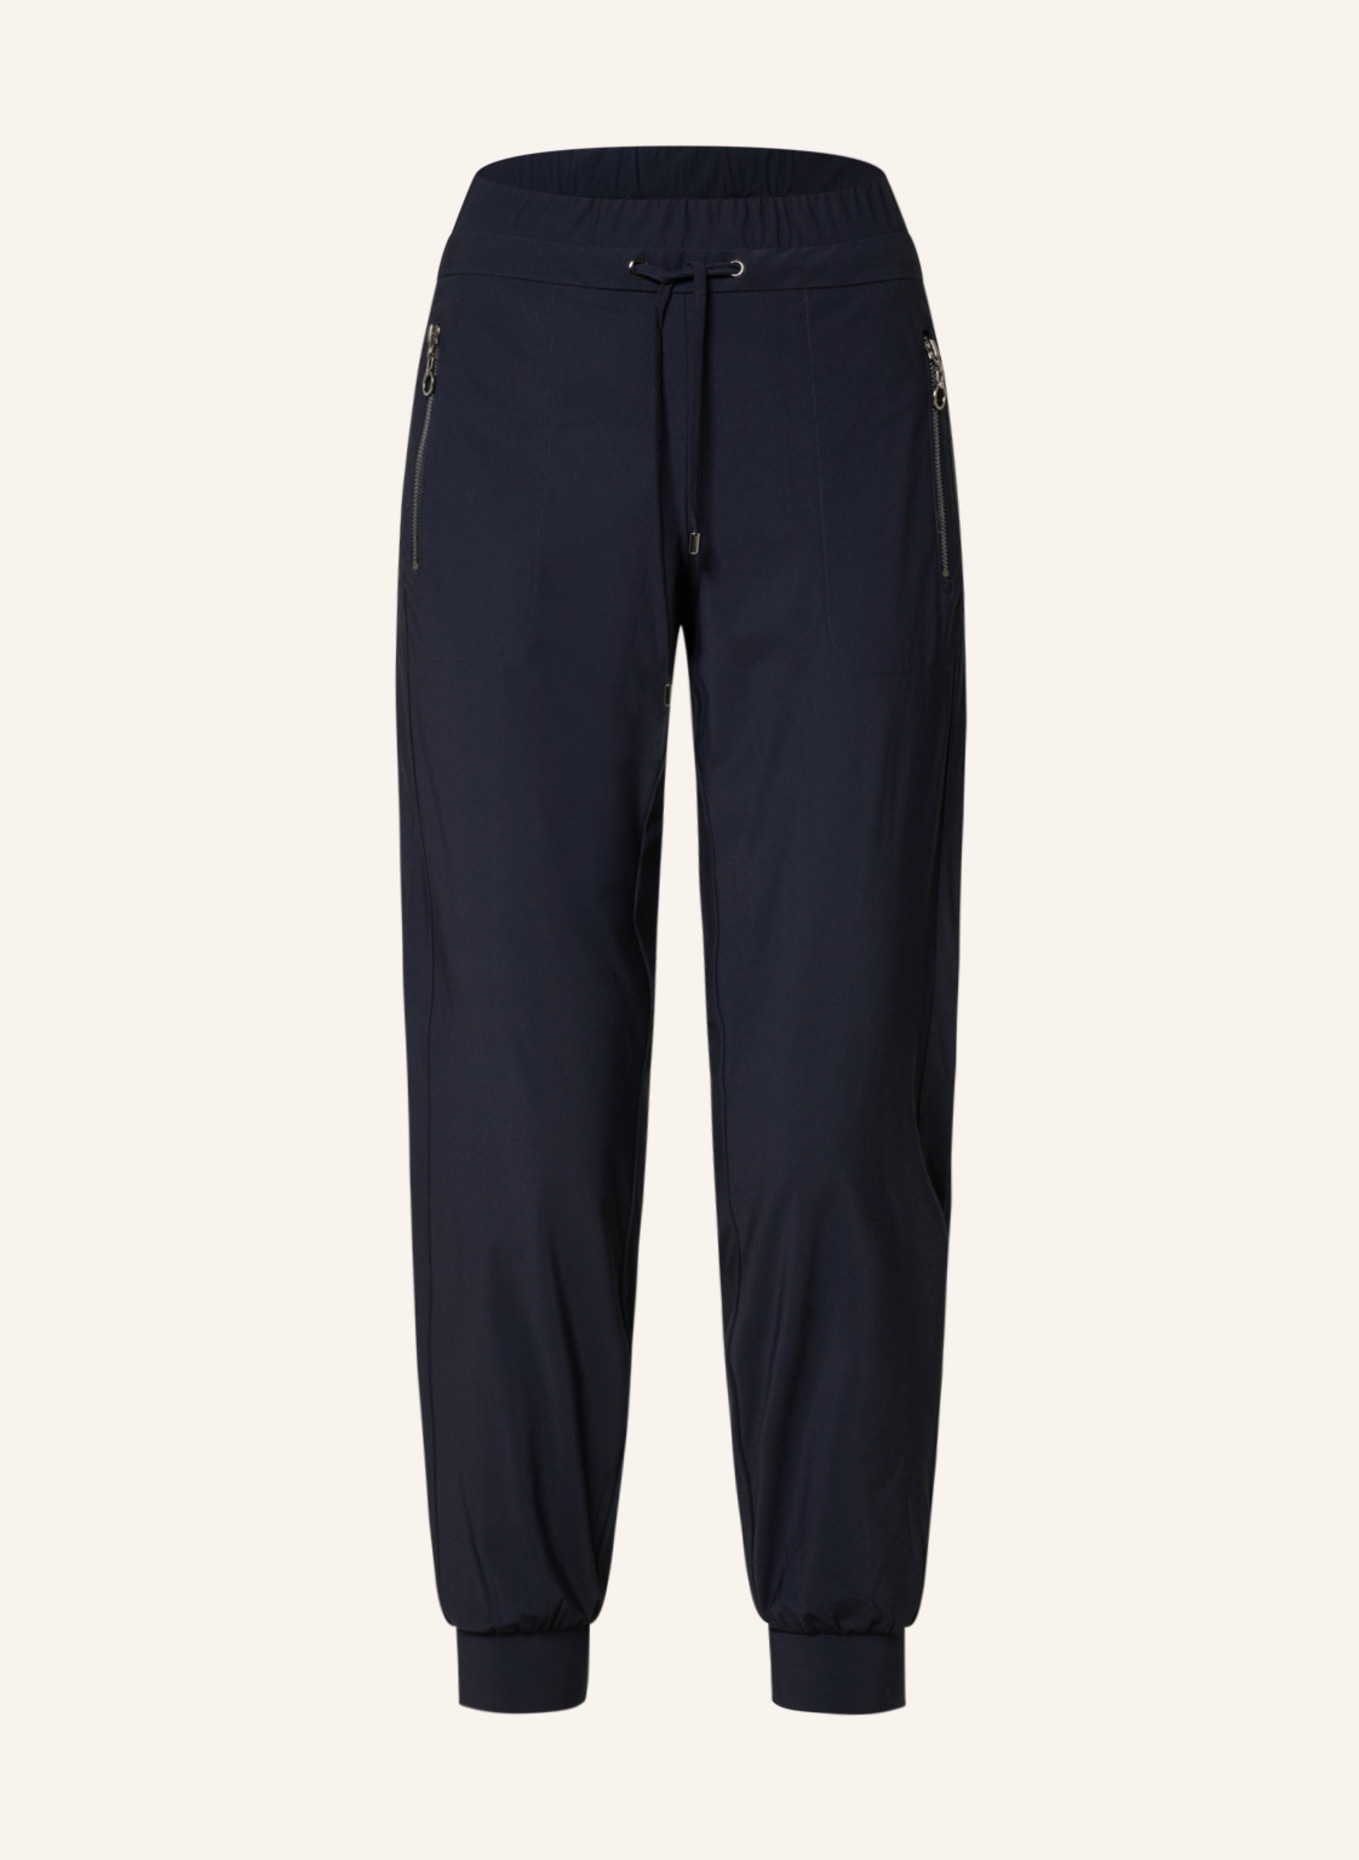 s.Oliver BLACK LABEL Trousers in jogger style, Color: DARK BLUE (Image 1)